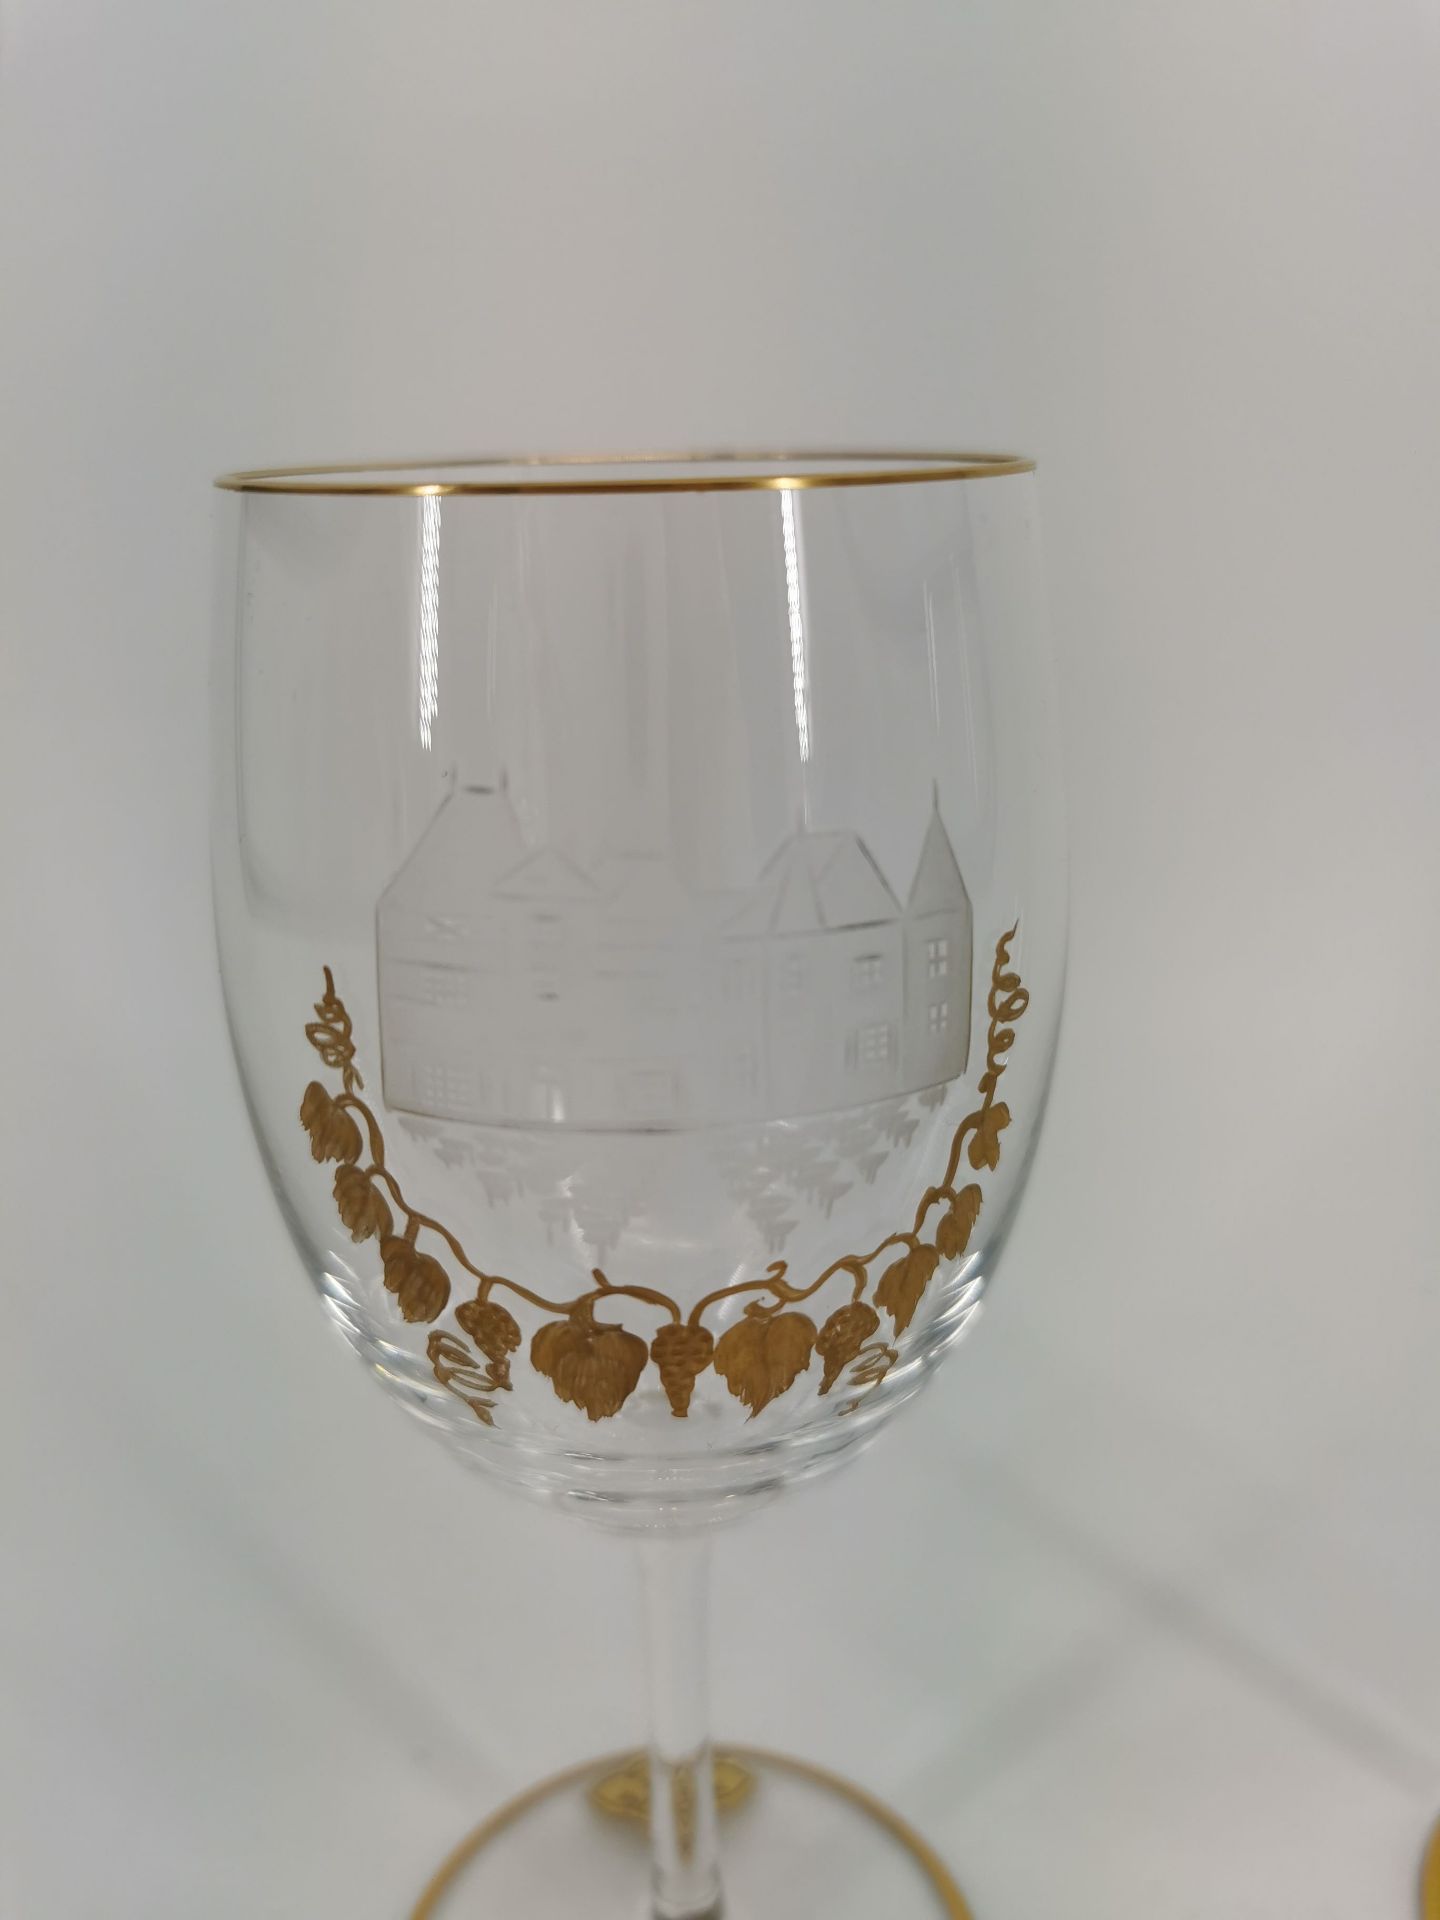 FOUR WINE GLASSES - Image 4 of 4